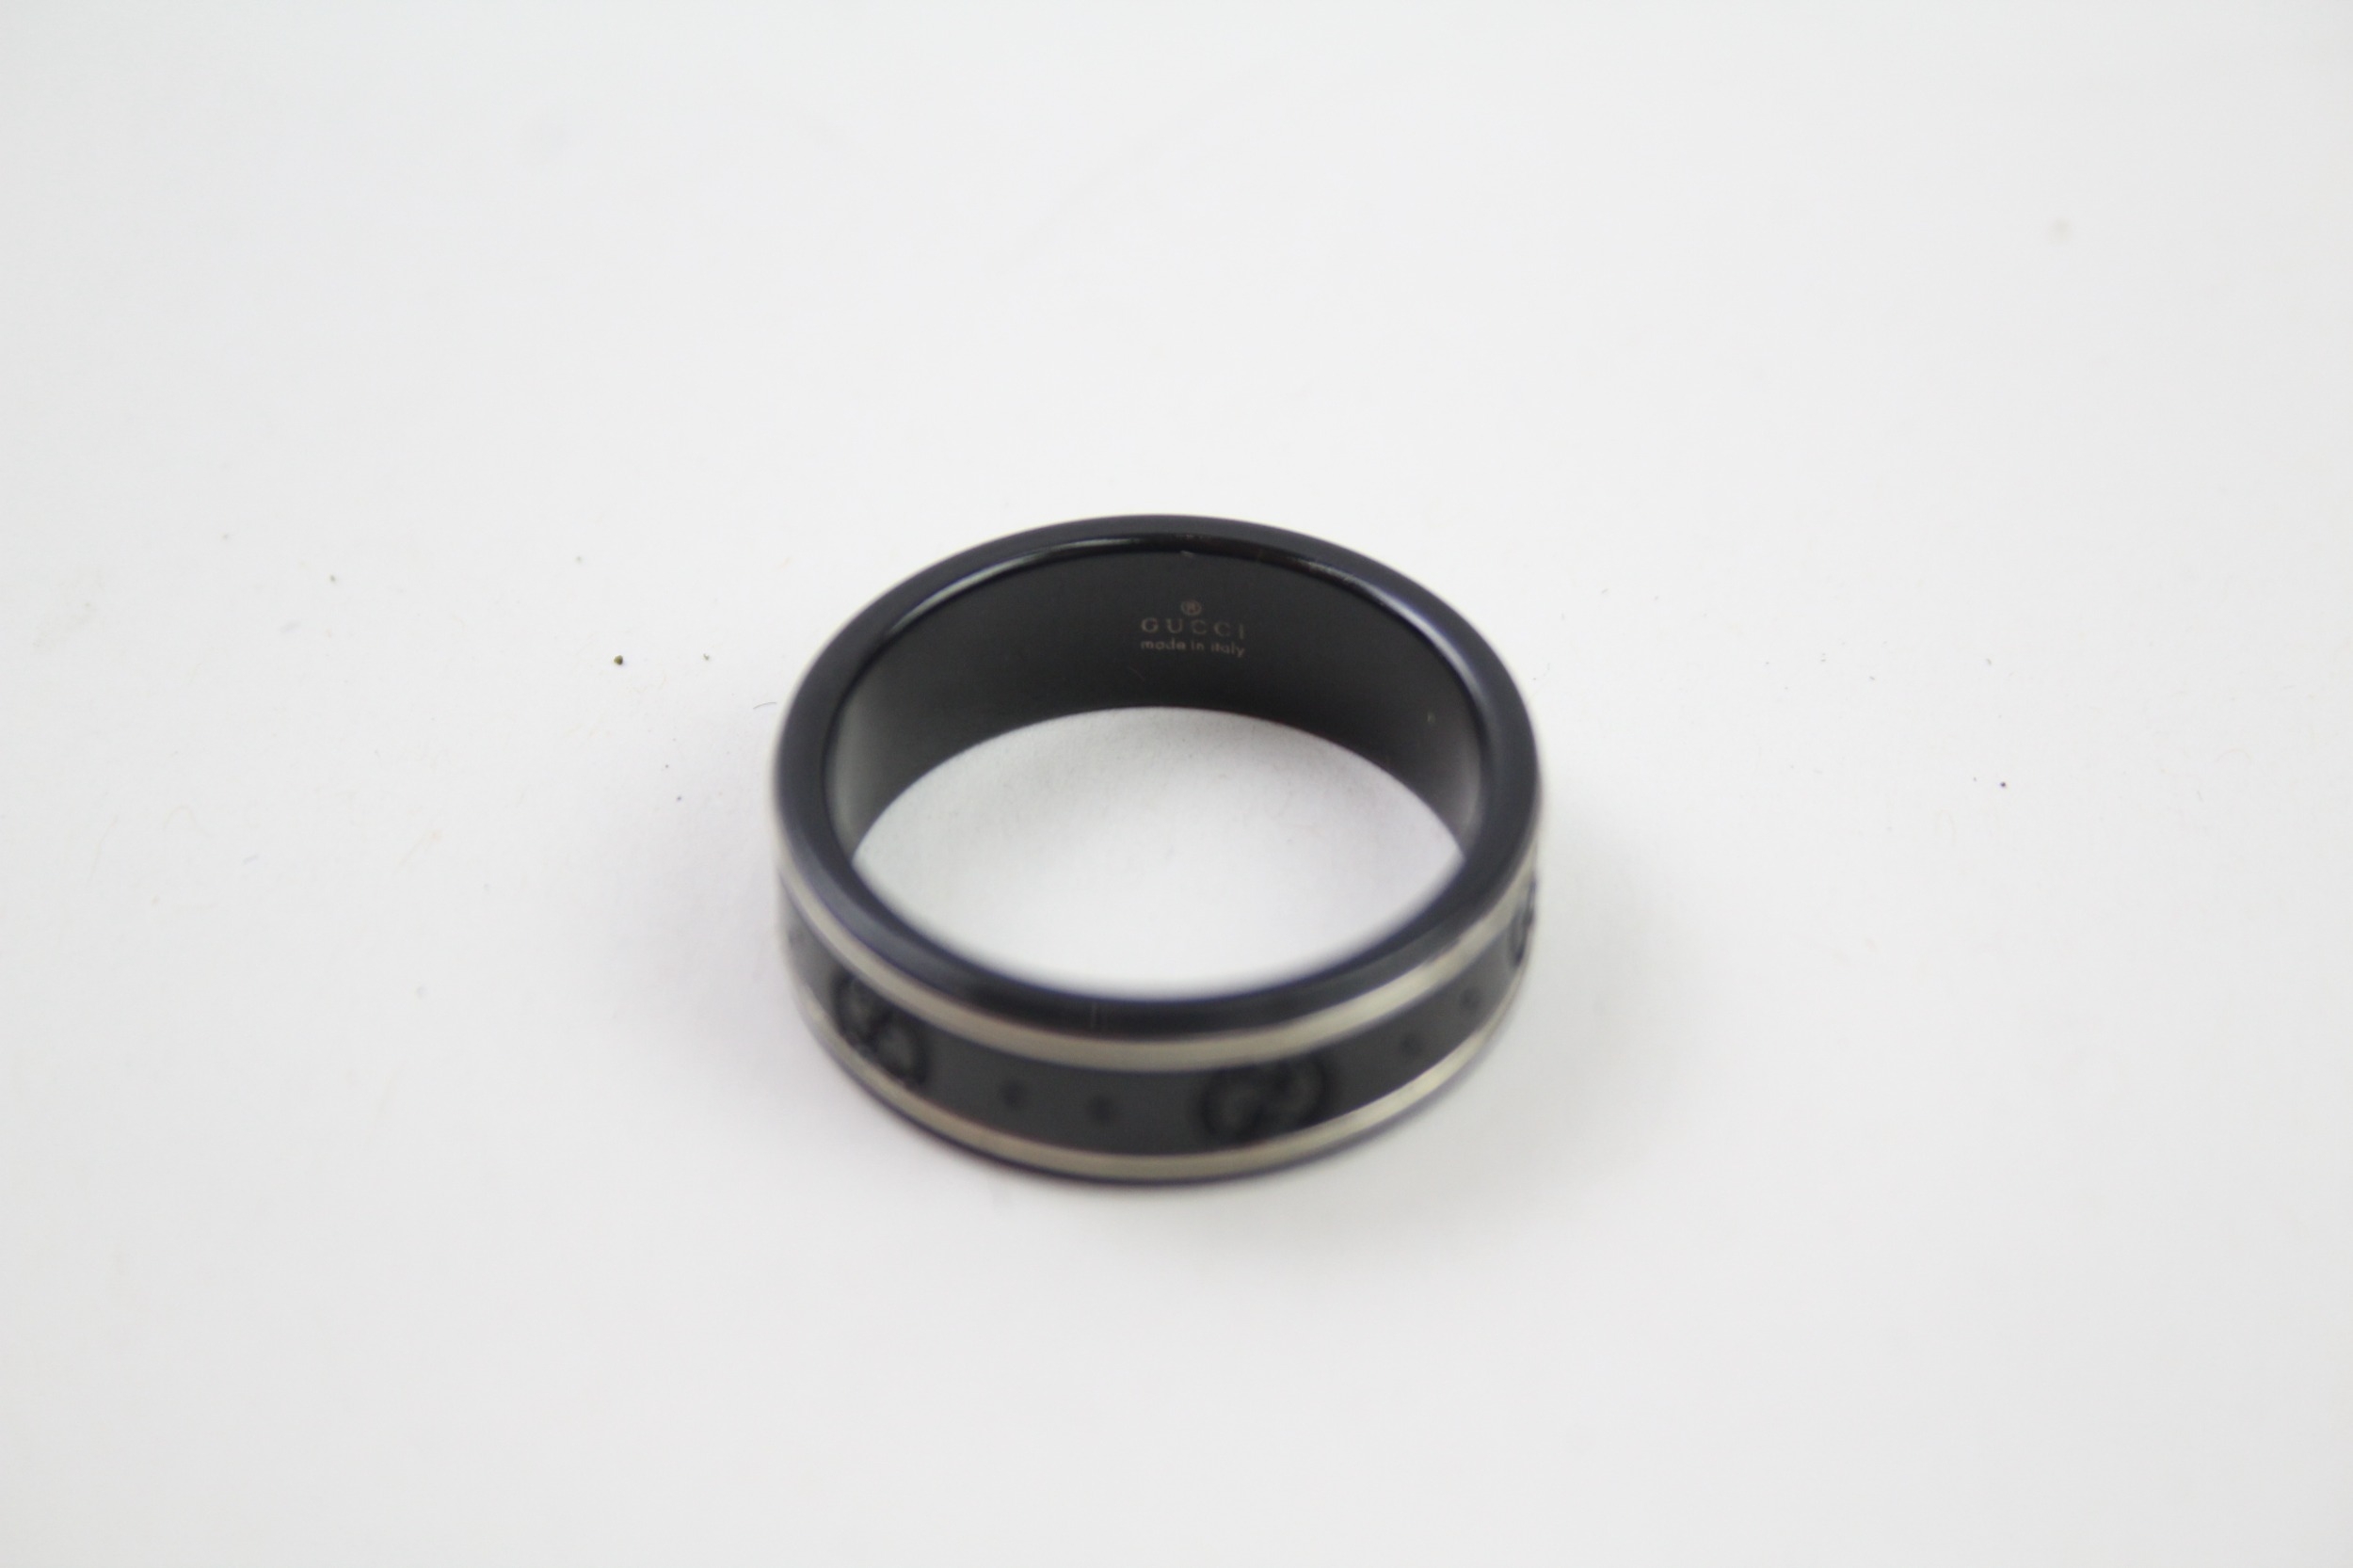 Black band ring by designer Gucci with box (3g) - Image 8 of 8